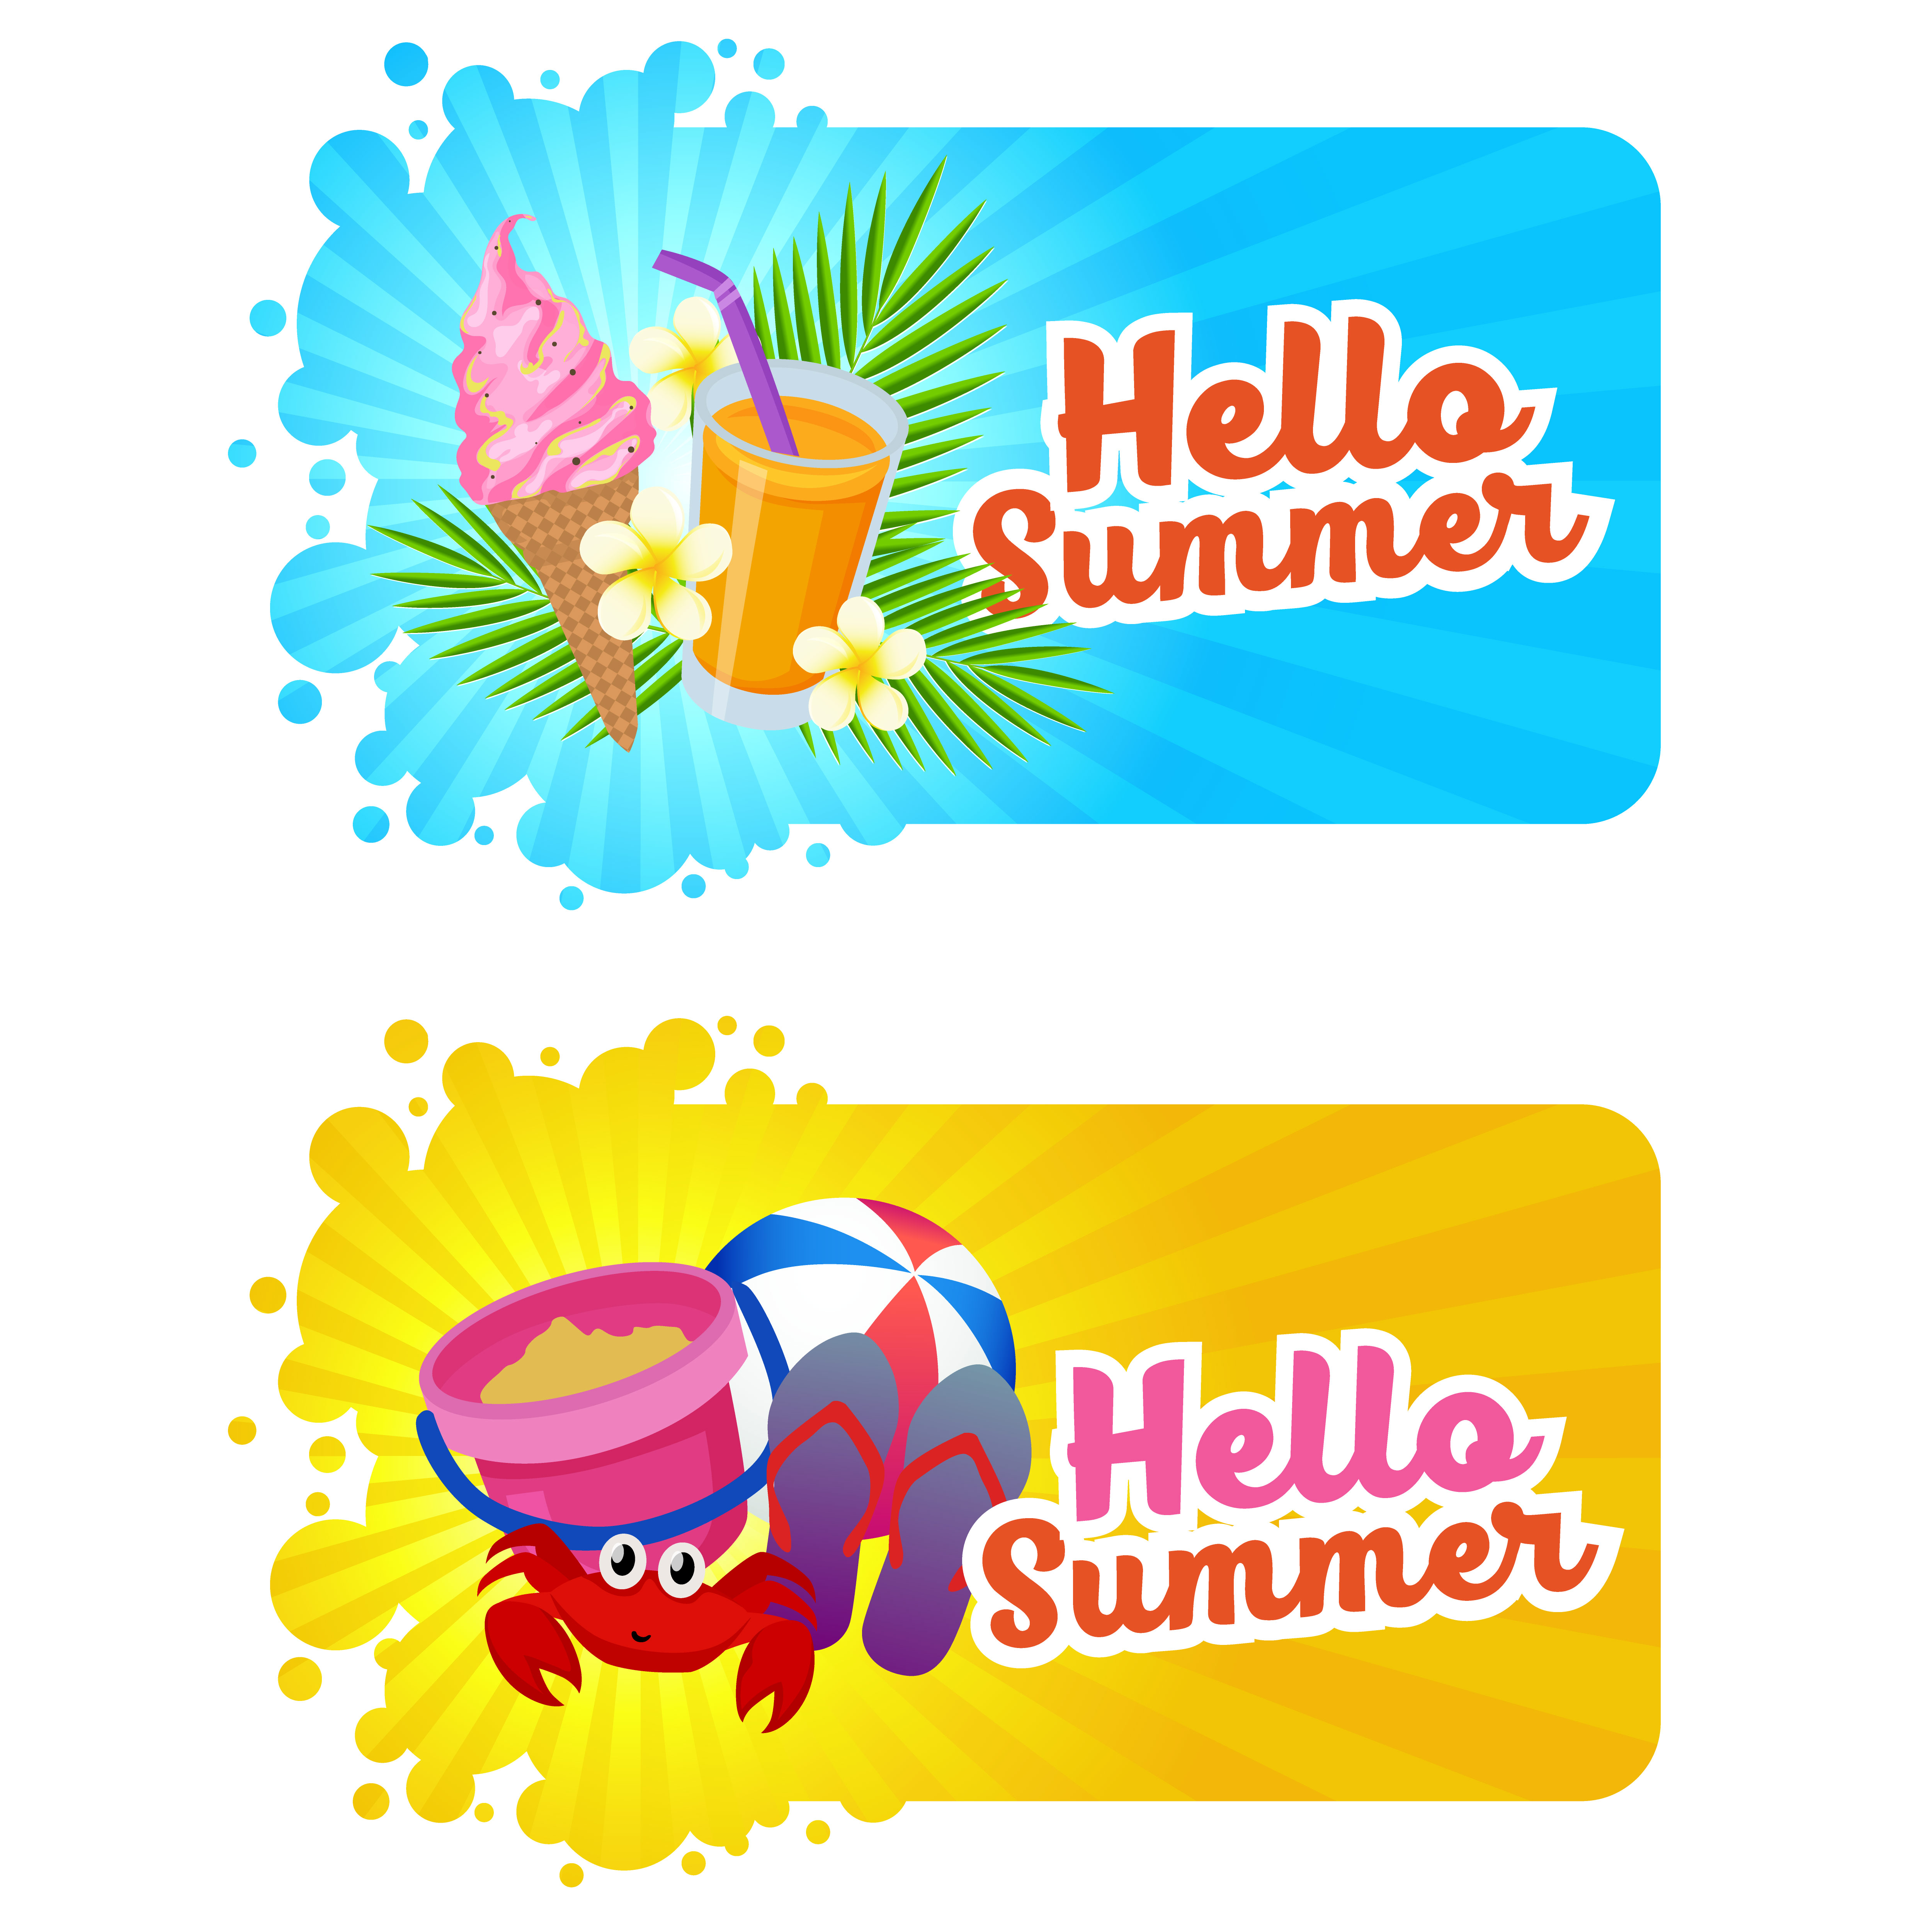 Download hello summer banner with beach fun theme - Download Free ...